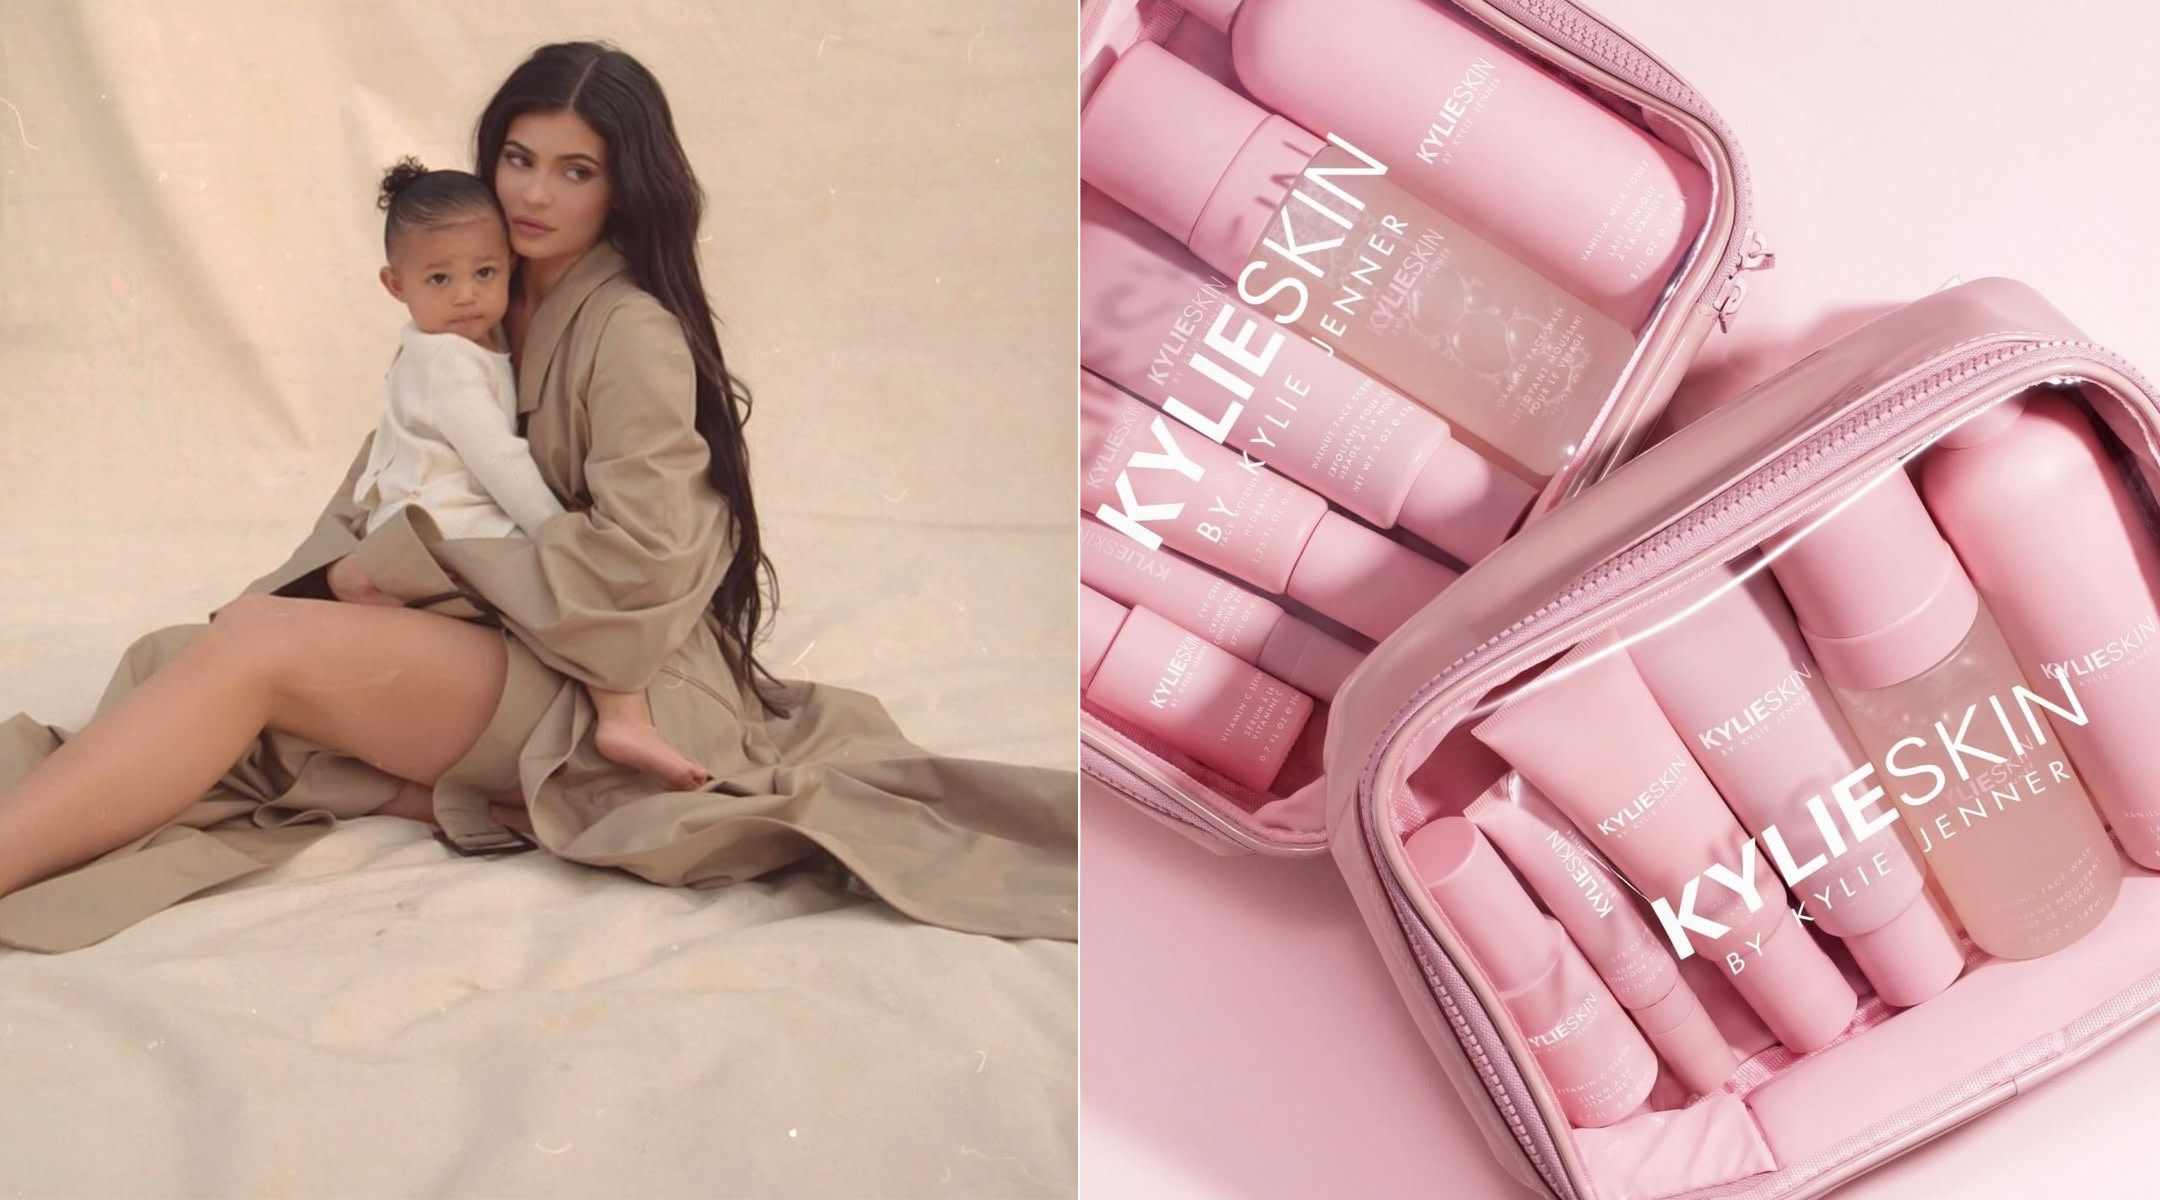 kylie jenner releases skincare line